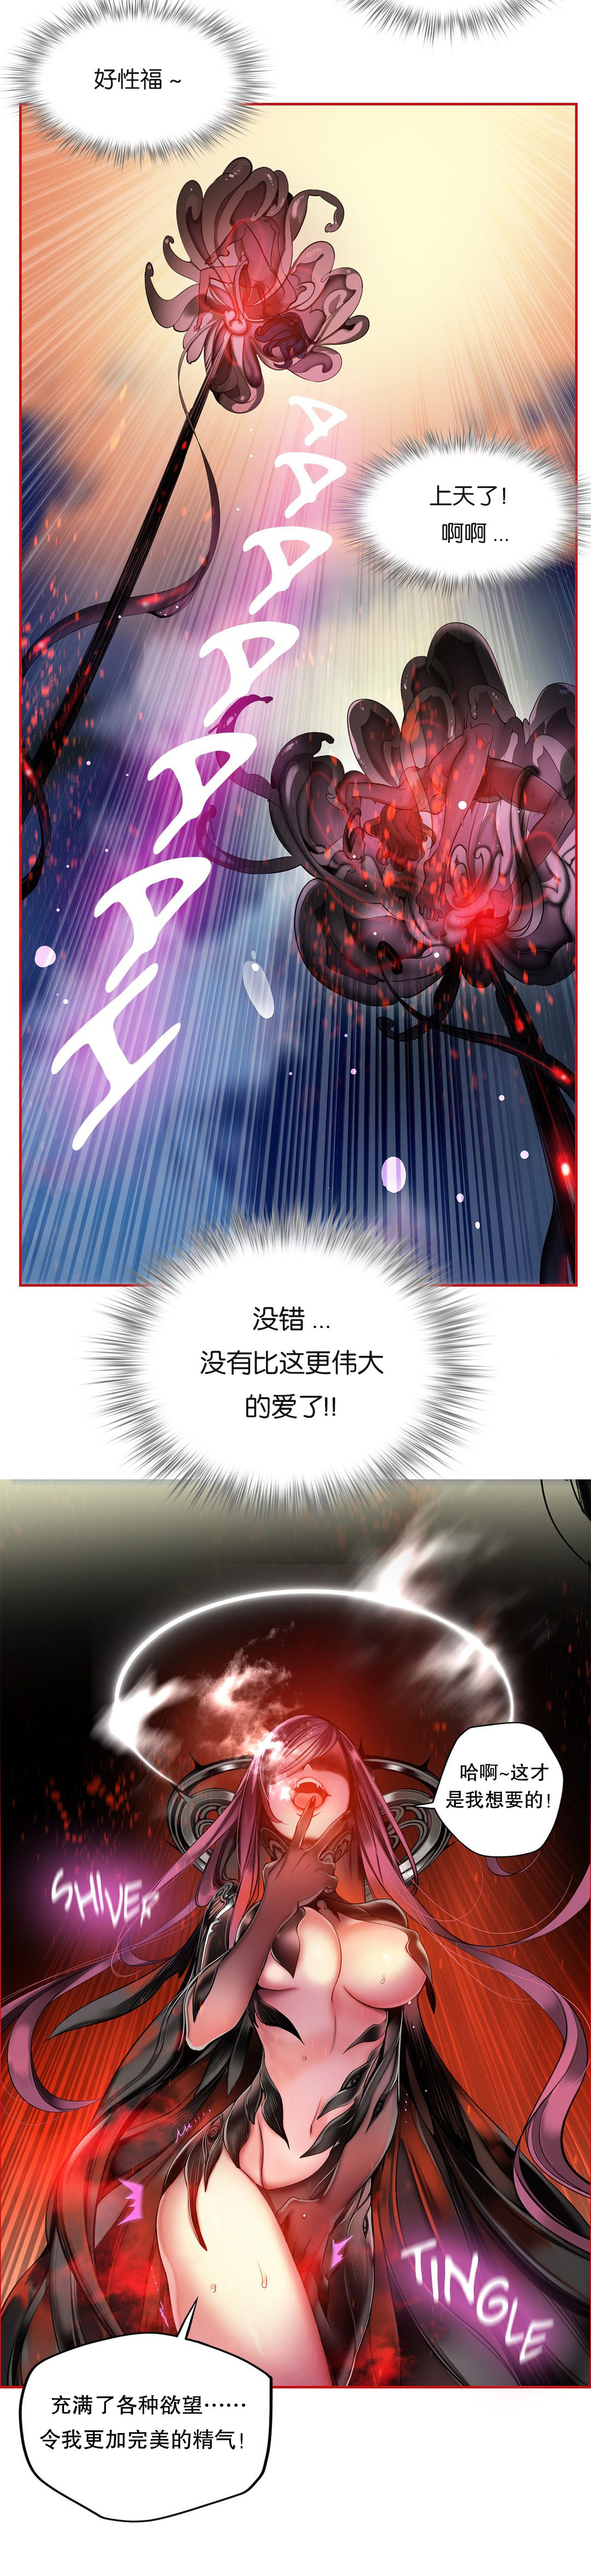 [Juder] Lilith`s Cord (第二季) Ch.61-64 [Chinese] [aaatwist个人汉化] [Ongoing] page 37 full